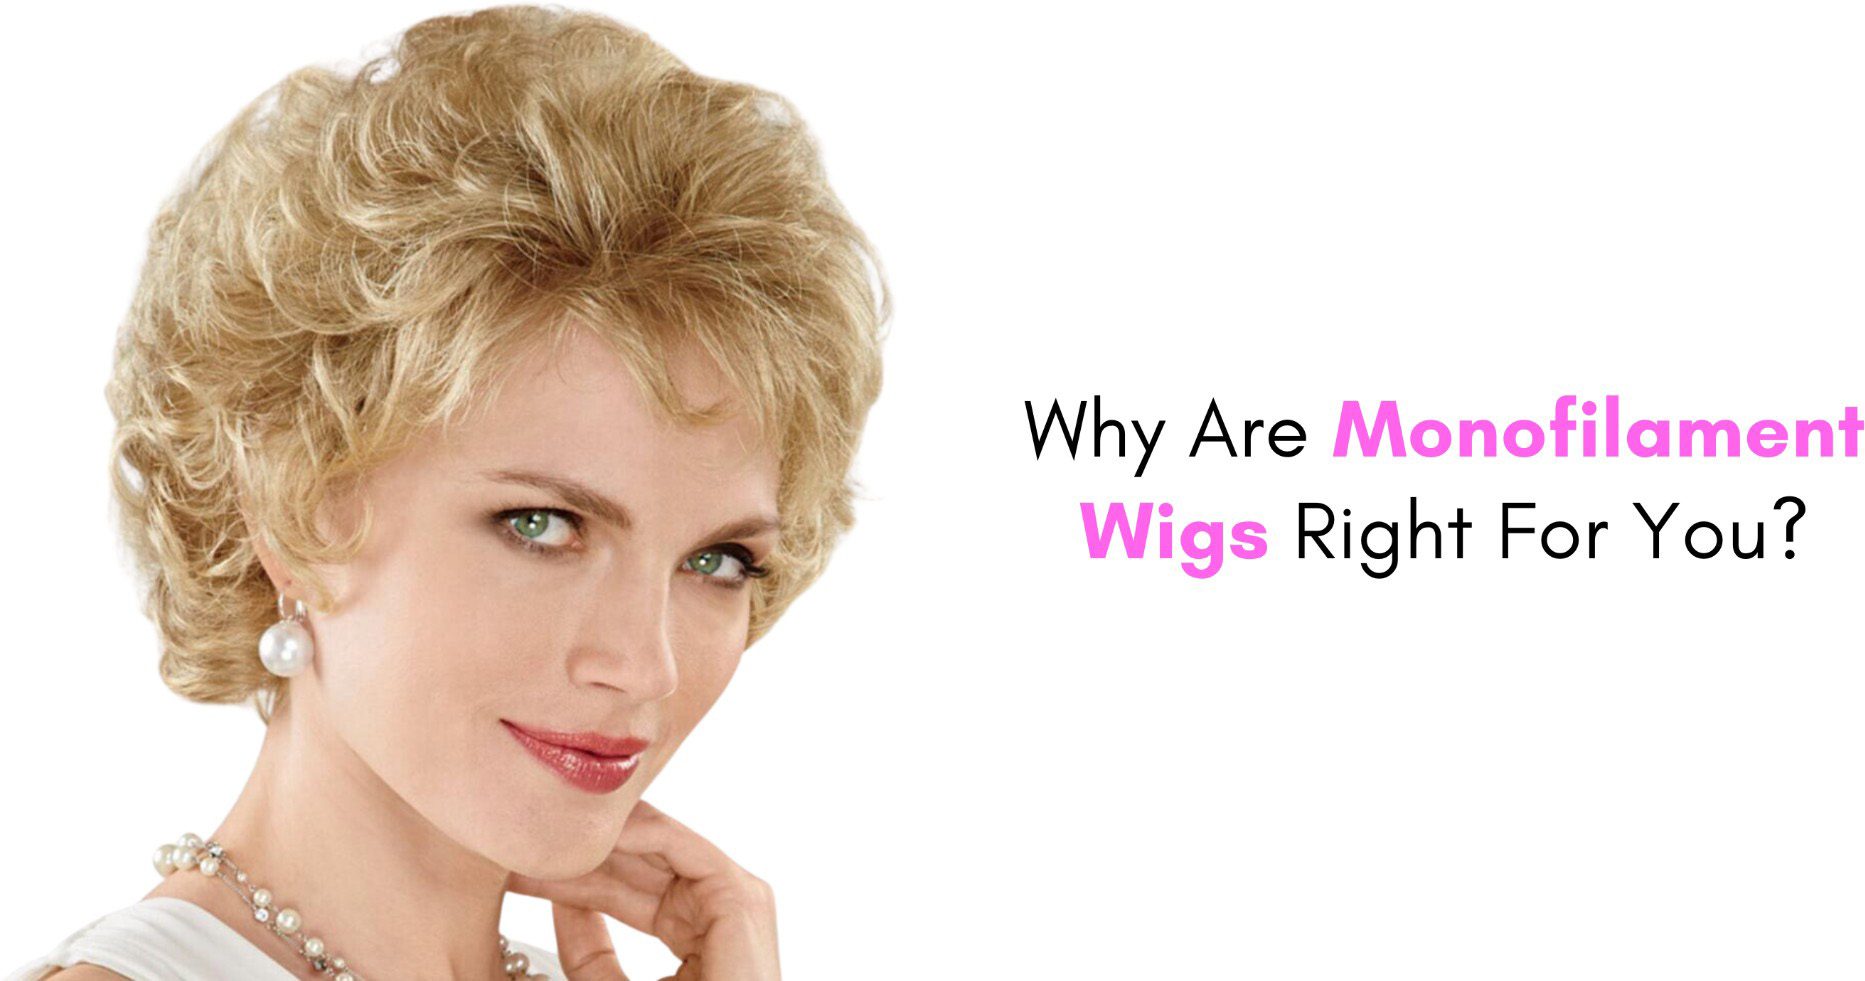 Why Are Monofilament Wigs Right For You?